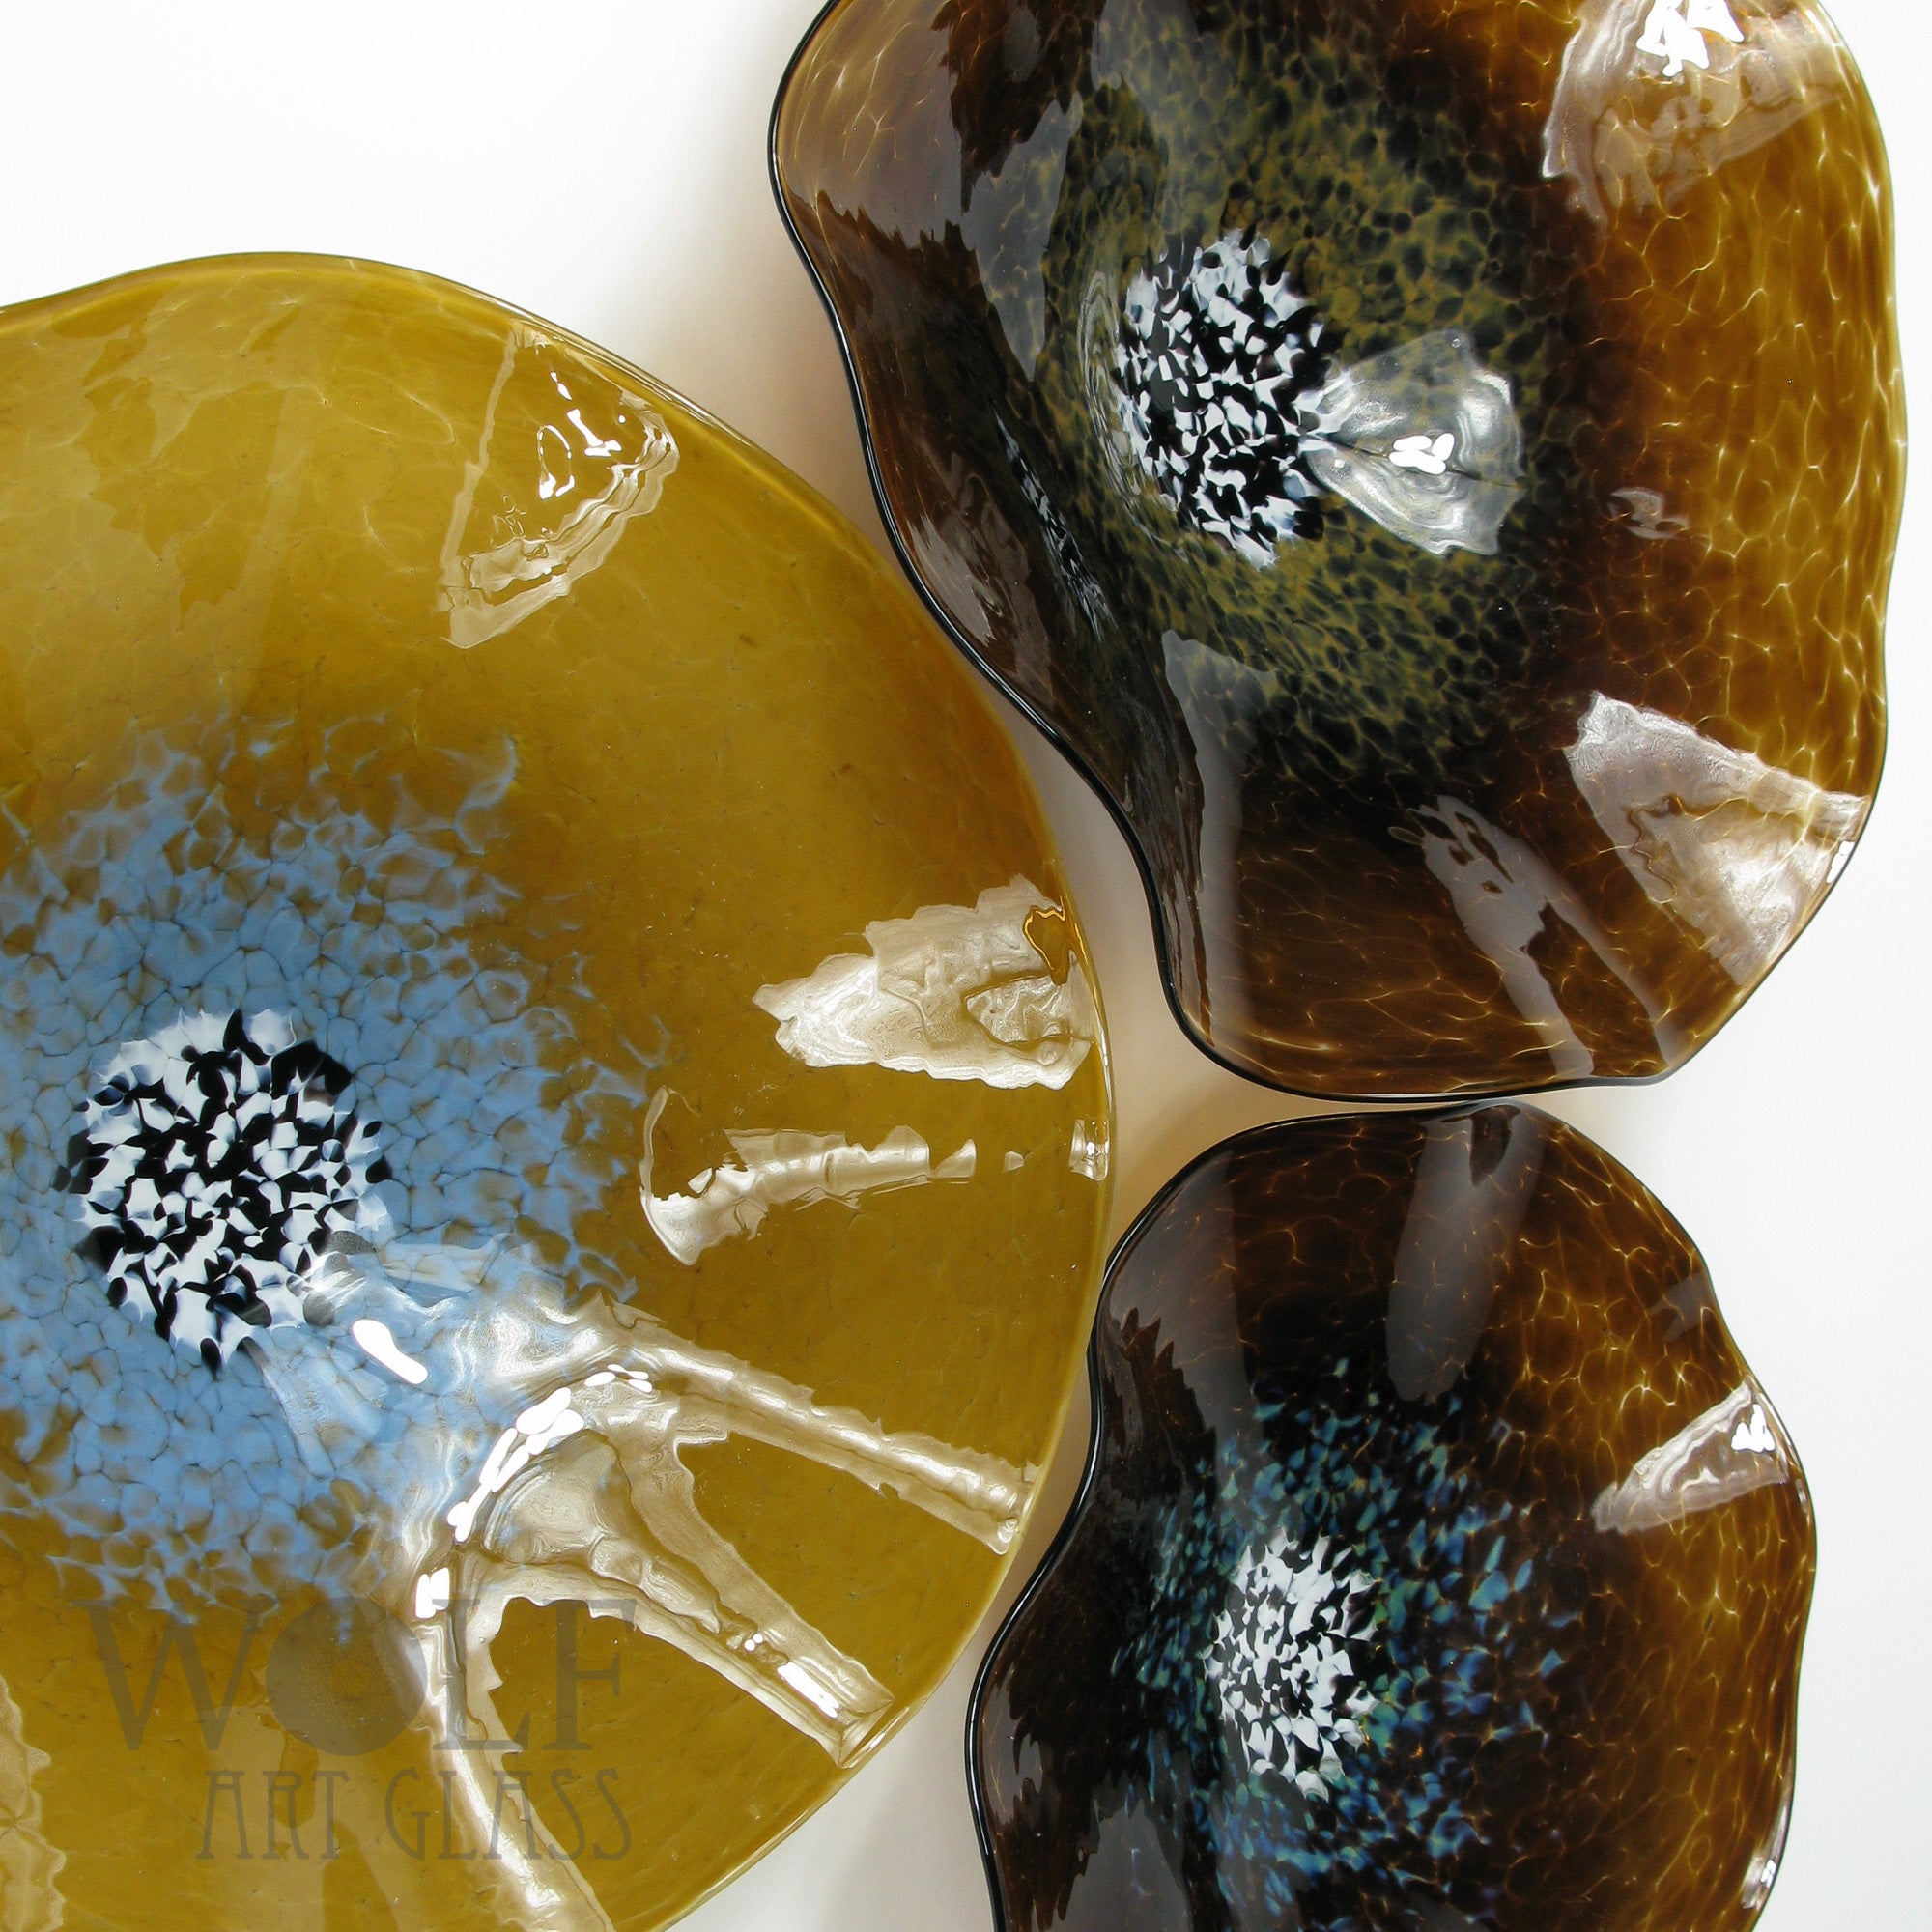 Amber Brown and Caramel Blown Glass Wall Art Flower Wall Decor Collection Installation